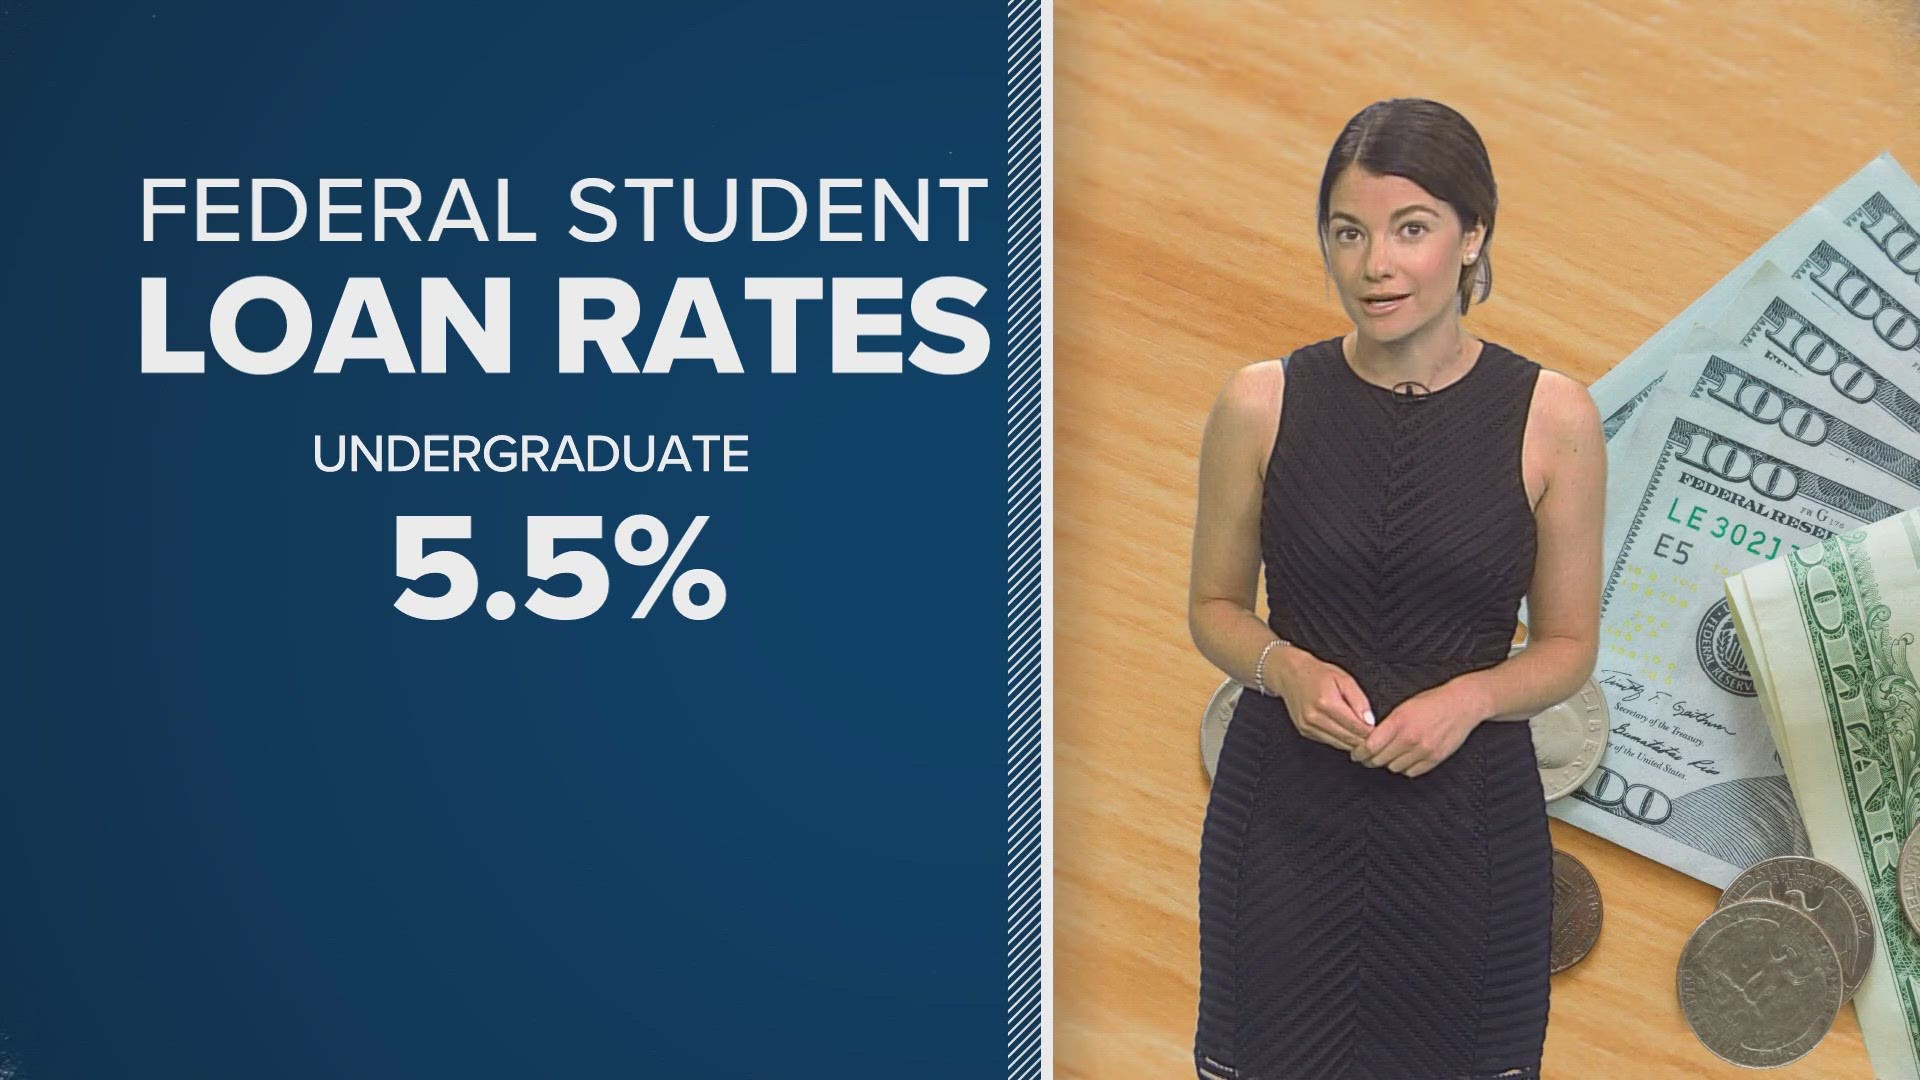 Rates are up on everything from mortgages to car loans.